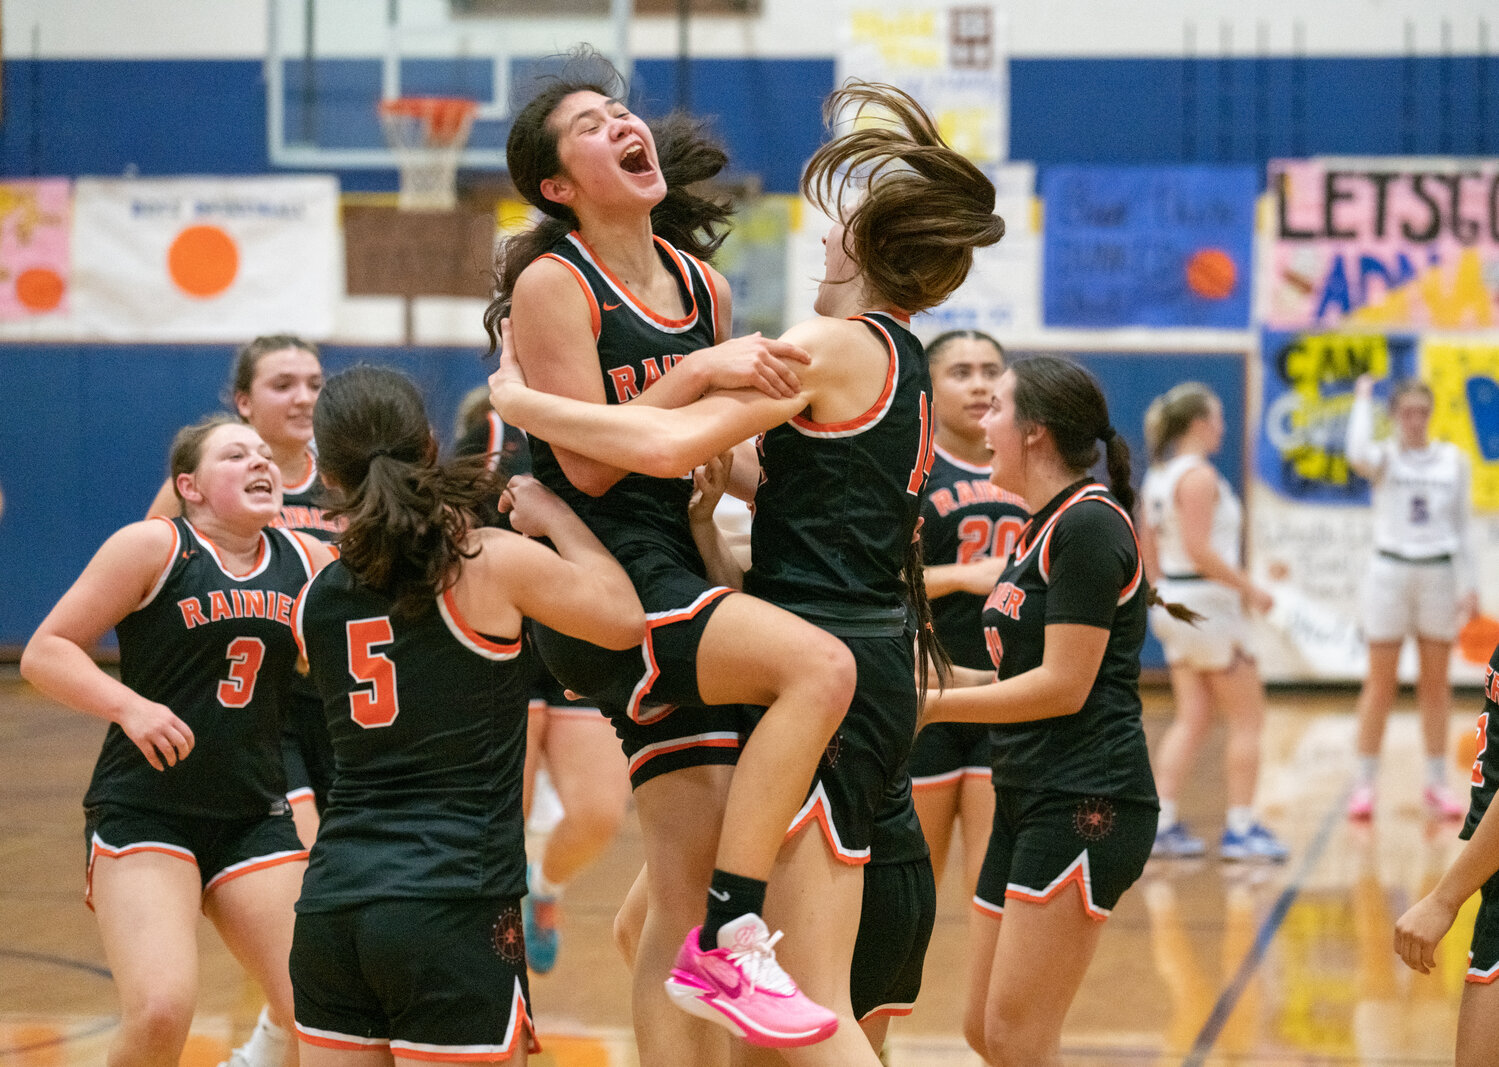 Angelica Askey and the Rainier Mountaineers celebrate their 52-49 win at Adna on Dec. 8.